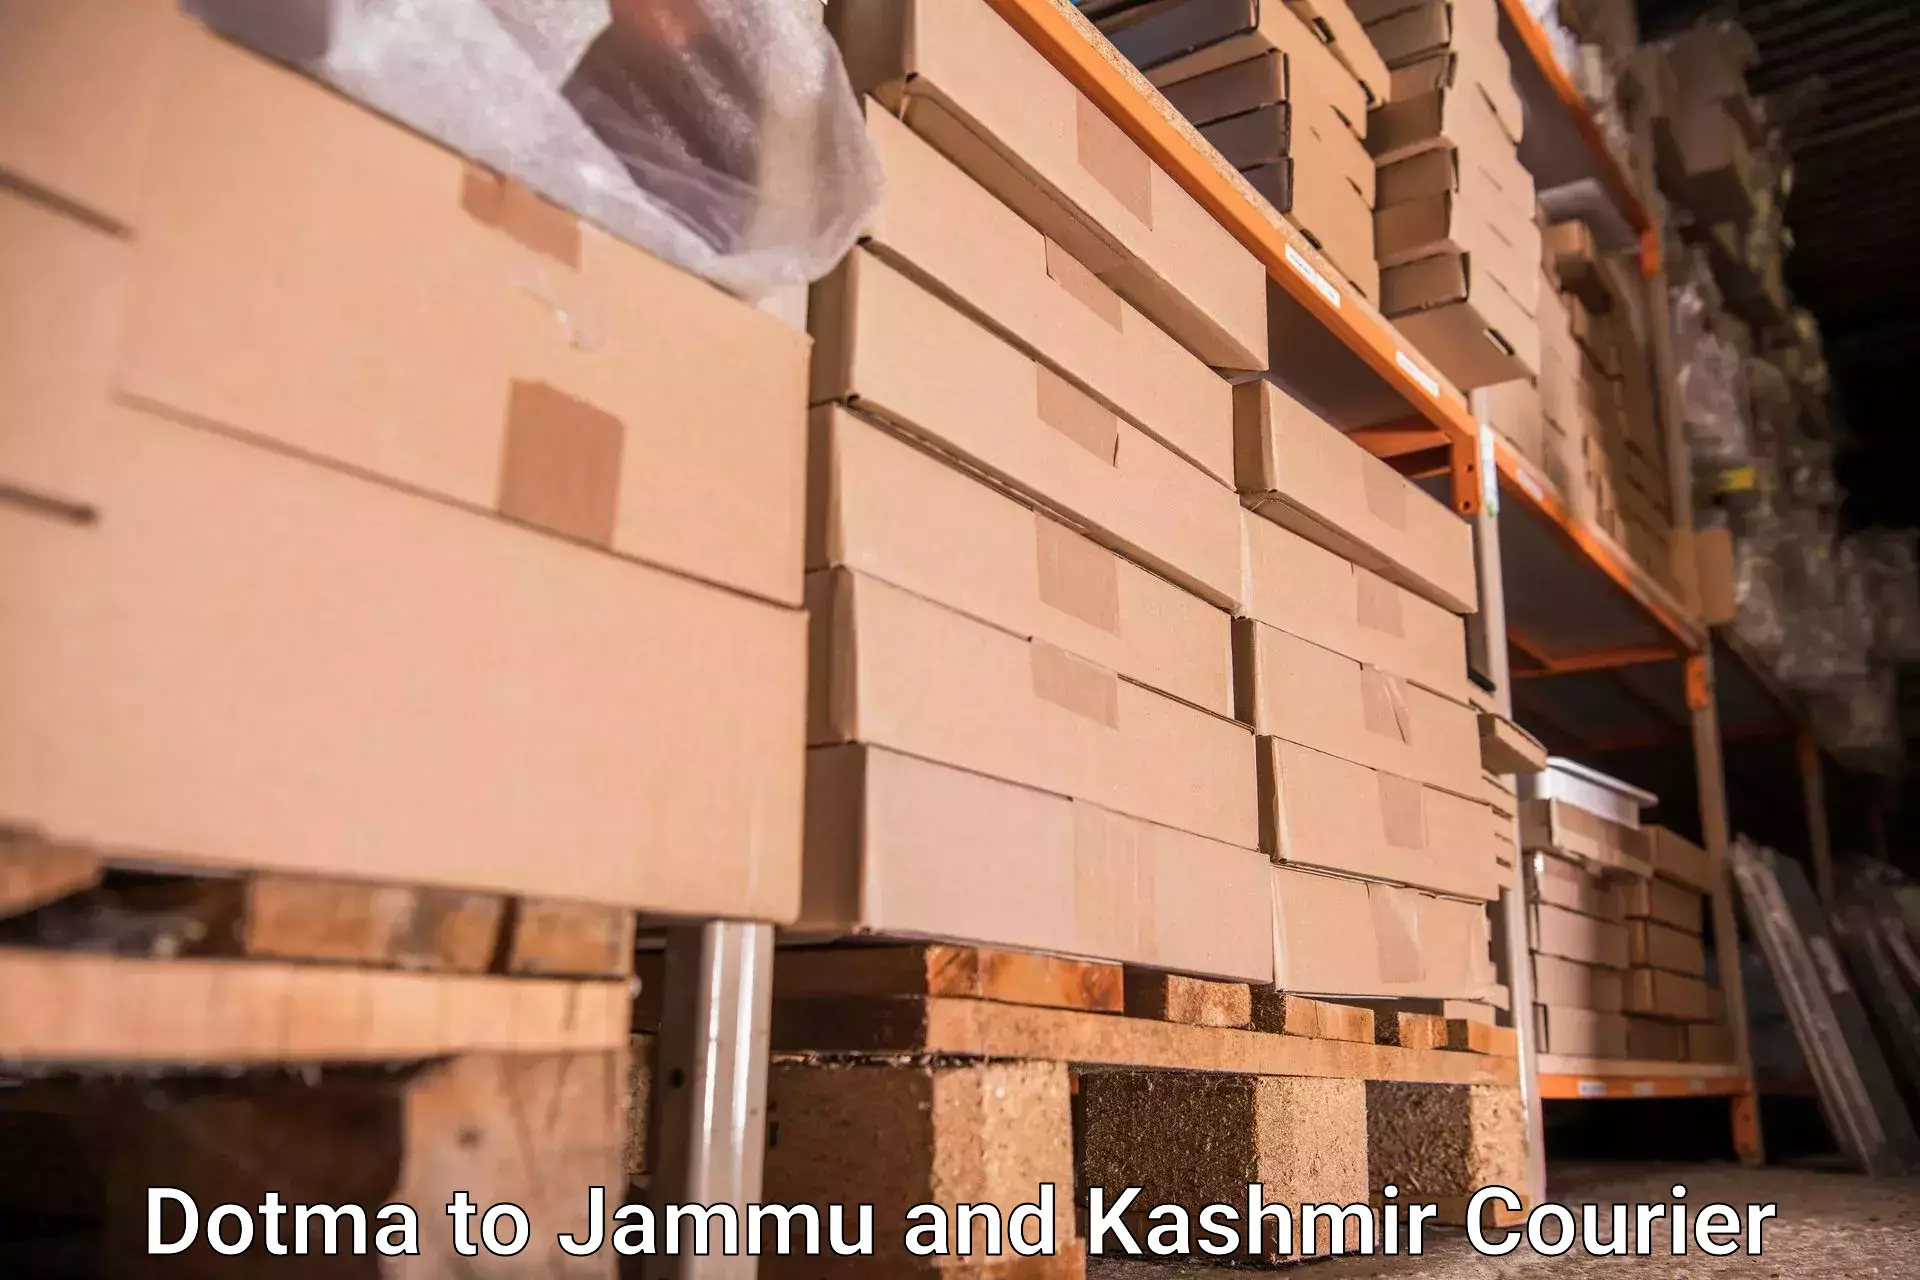 Personal effects shipping Dotma to Rajouri